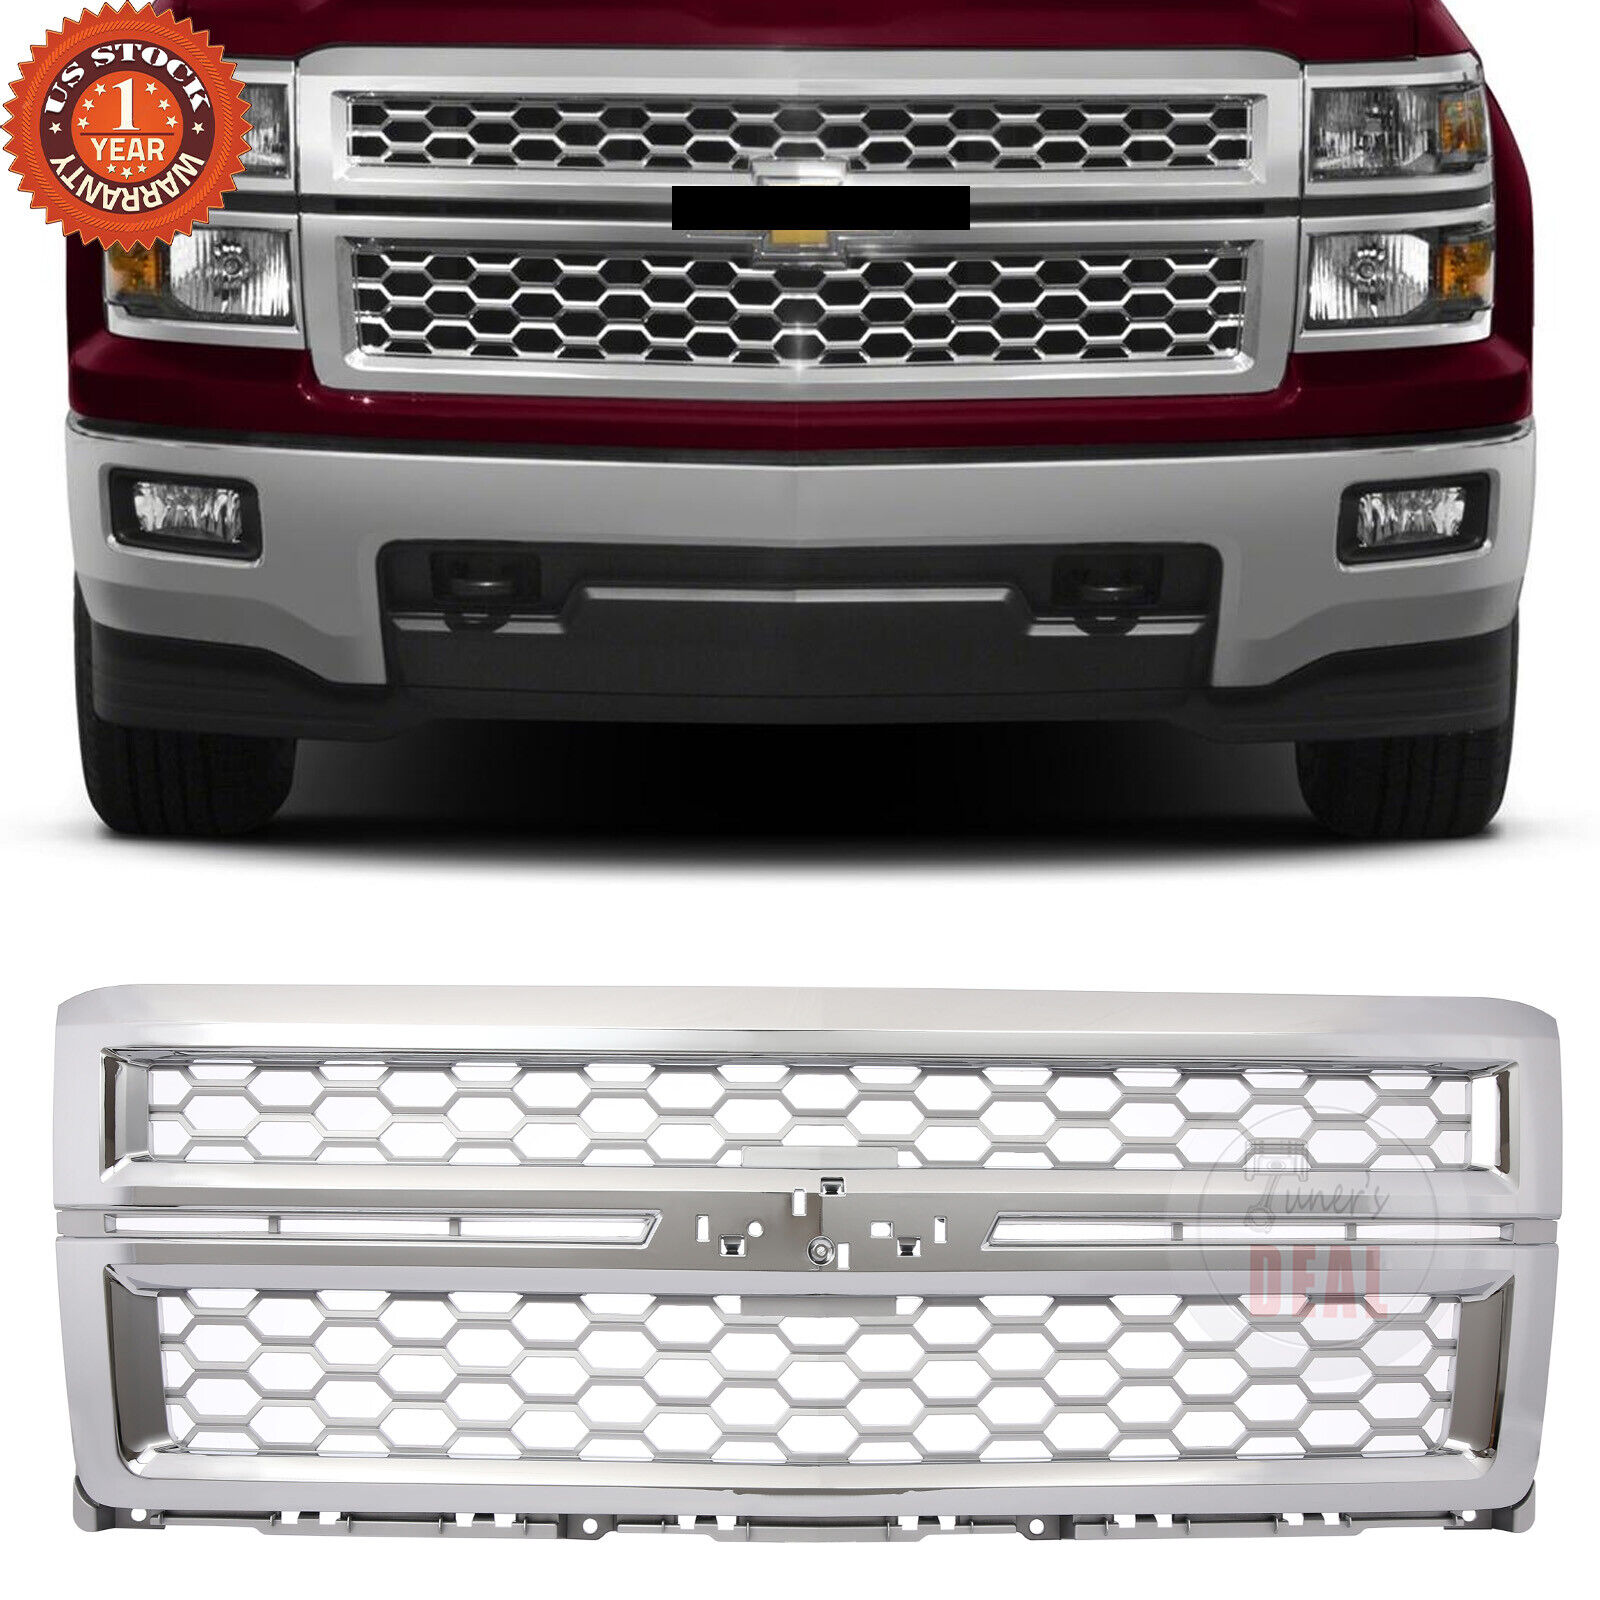 For 2014-2015 Chevrolet Silverado 1500 Front Grille Honeycomb Chrome GM1200712